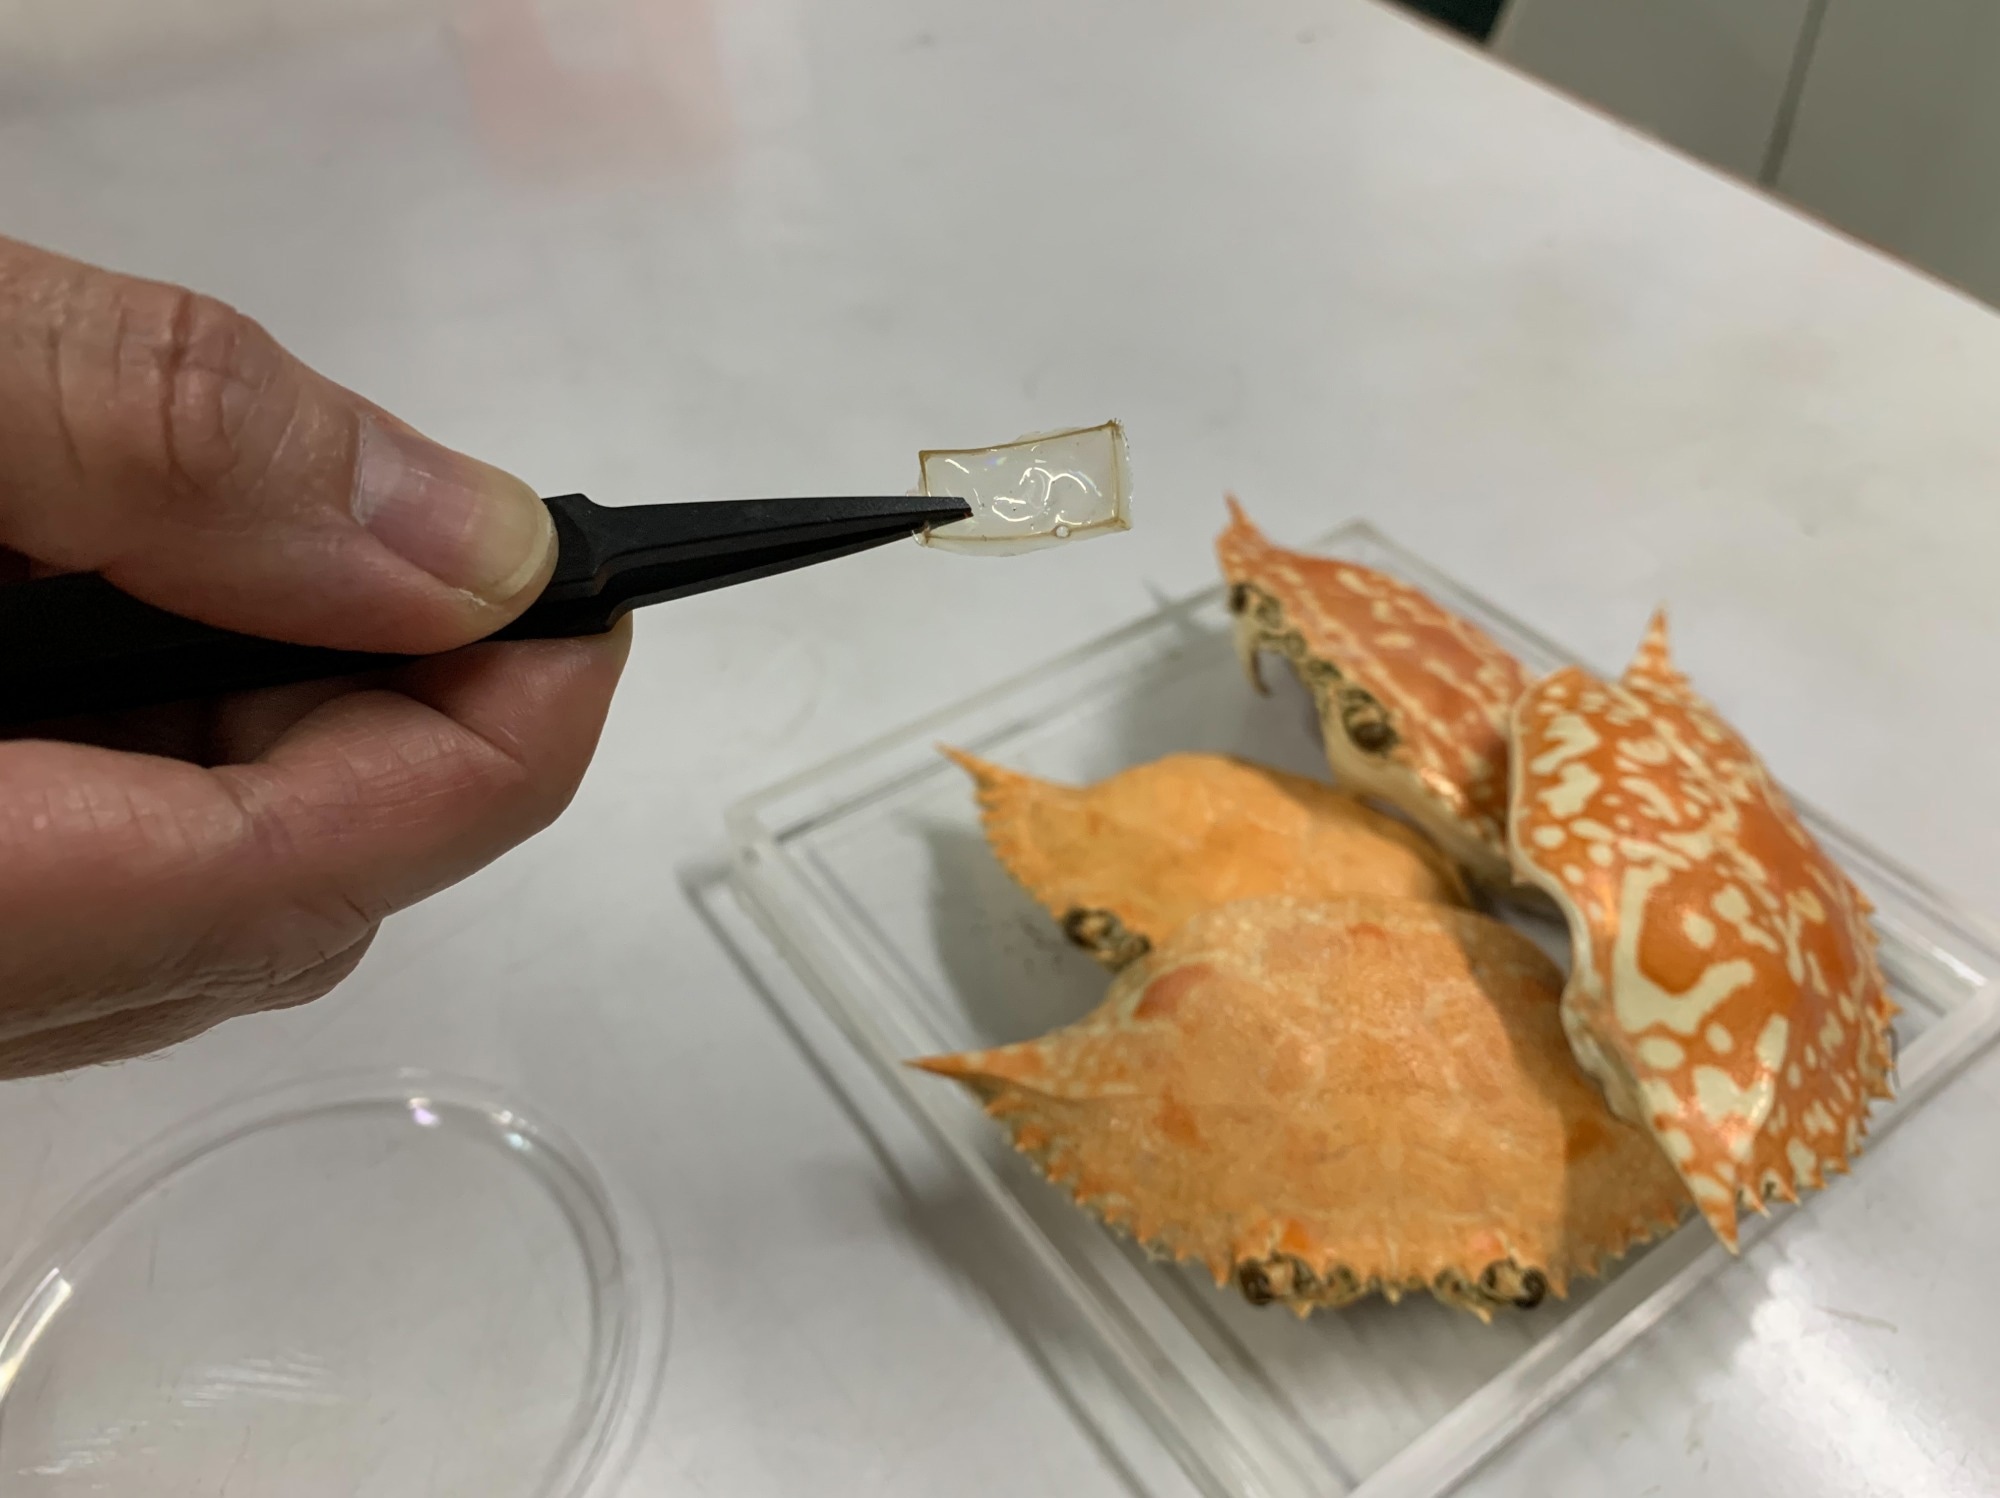 Developing Biodegradable Optical Components from Crab Shells